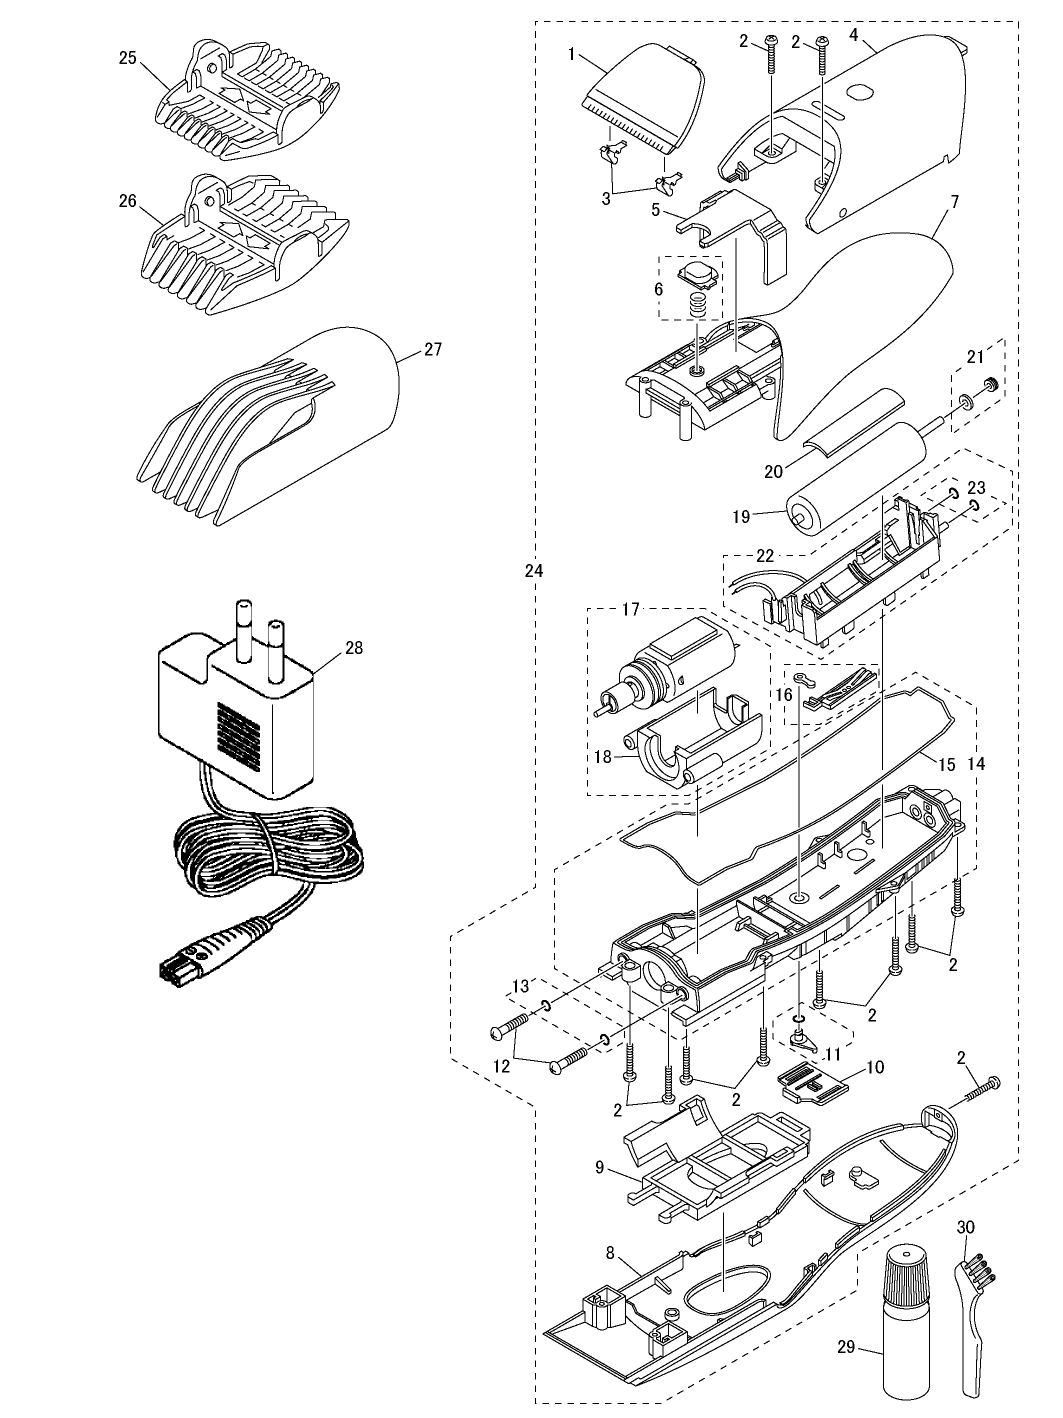 ER-CA35: Exploded View